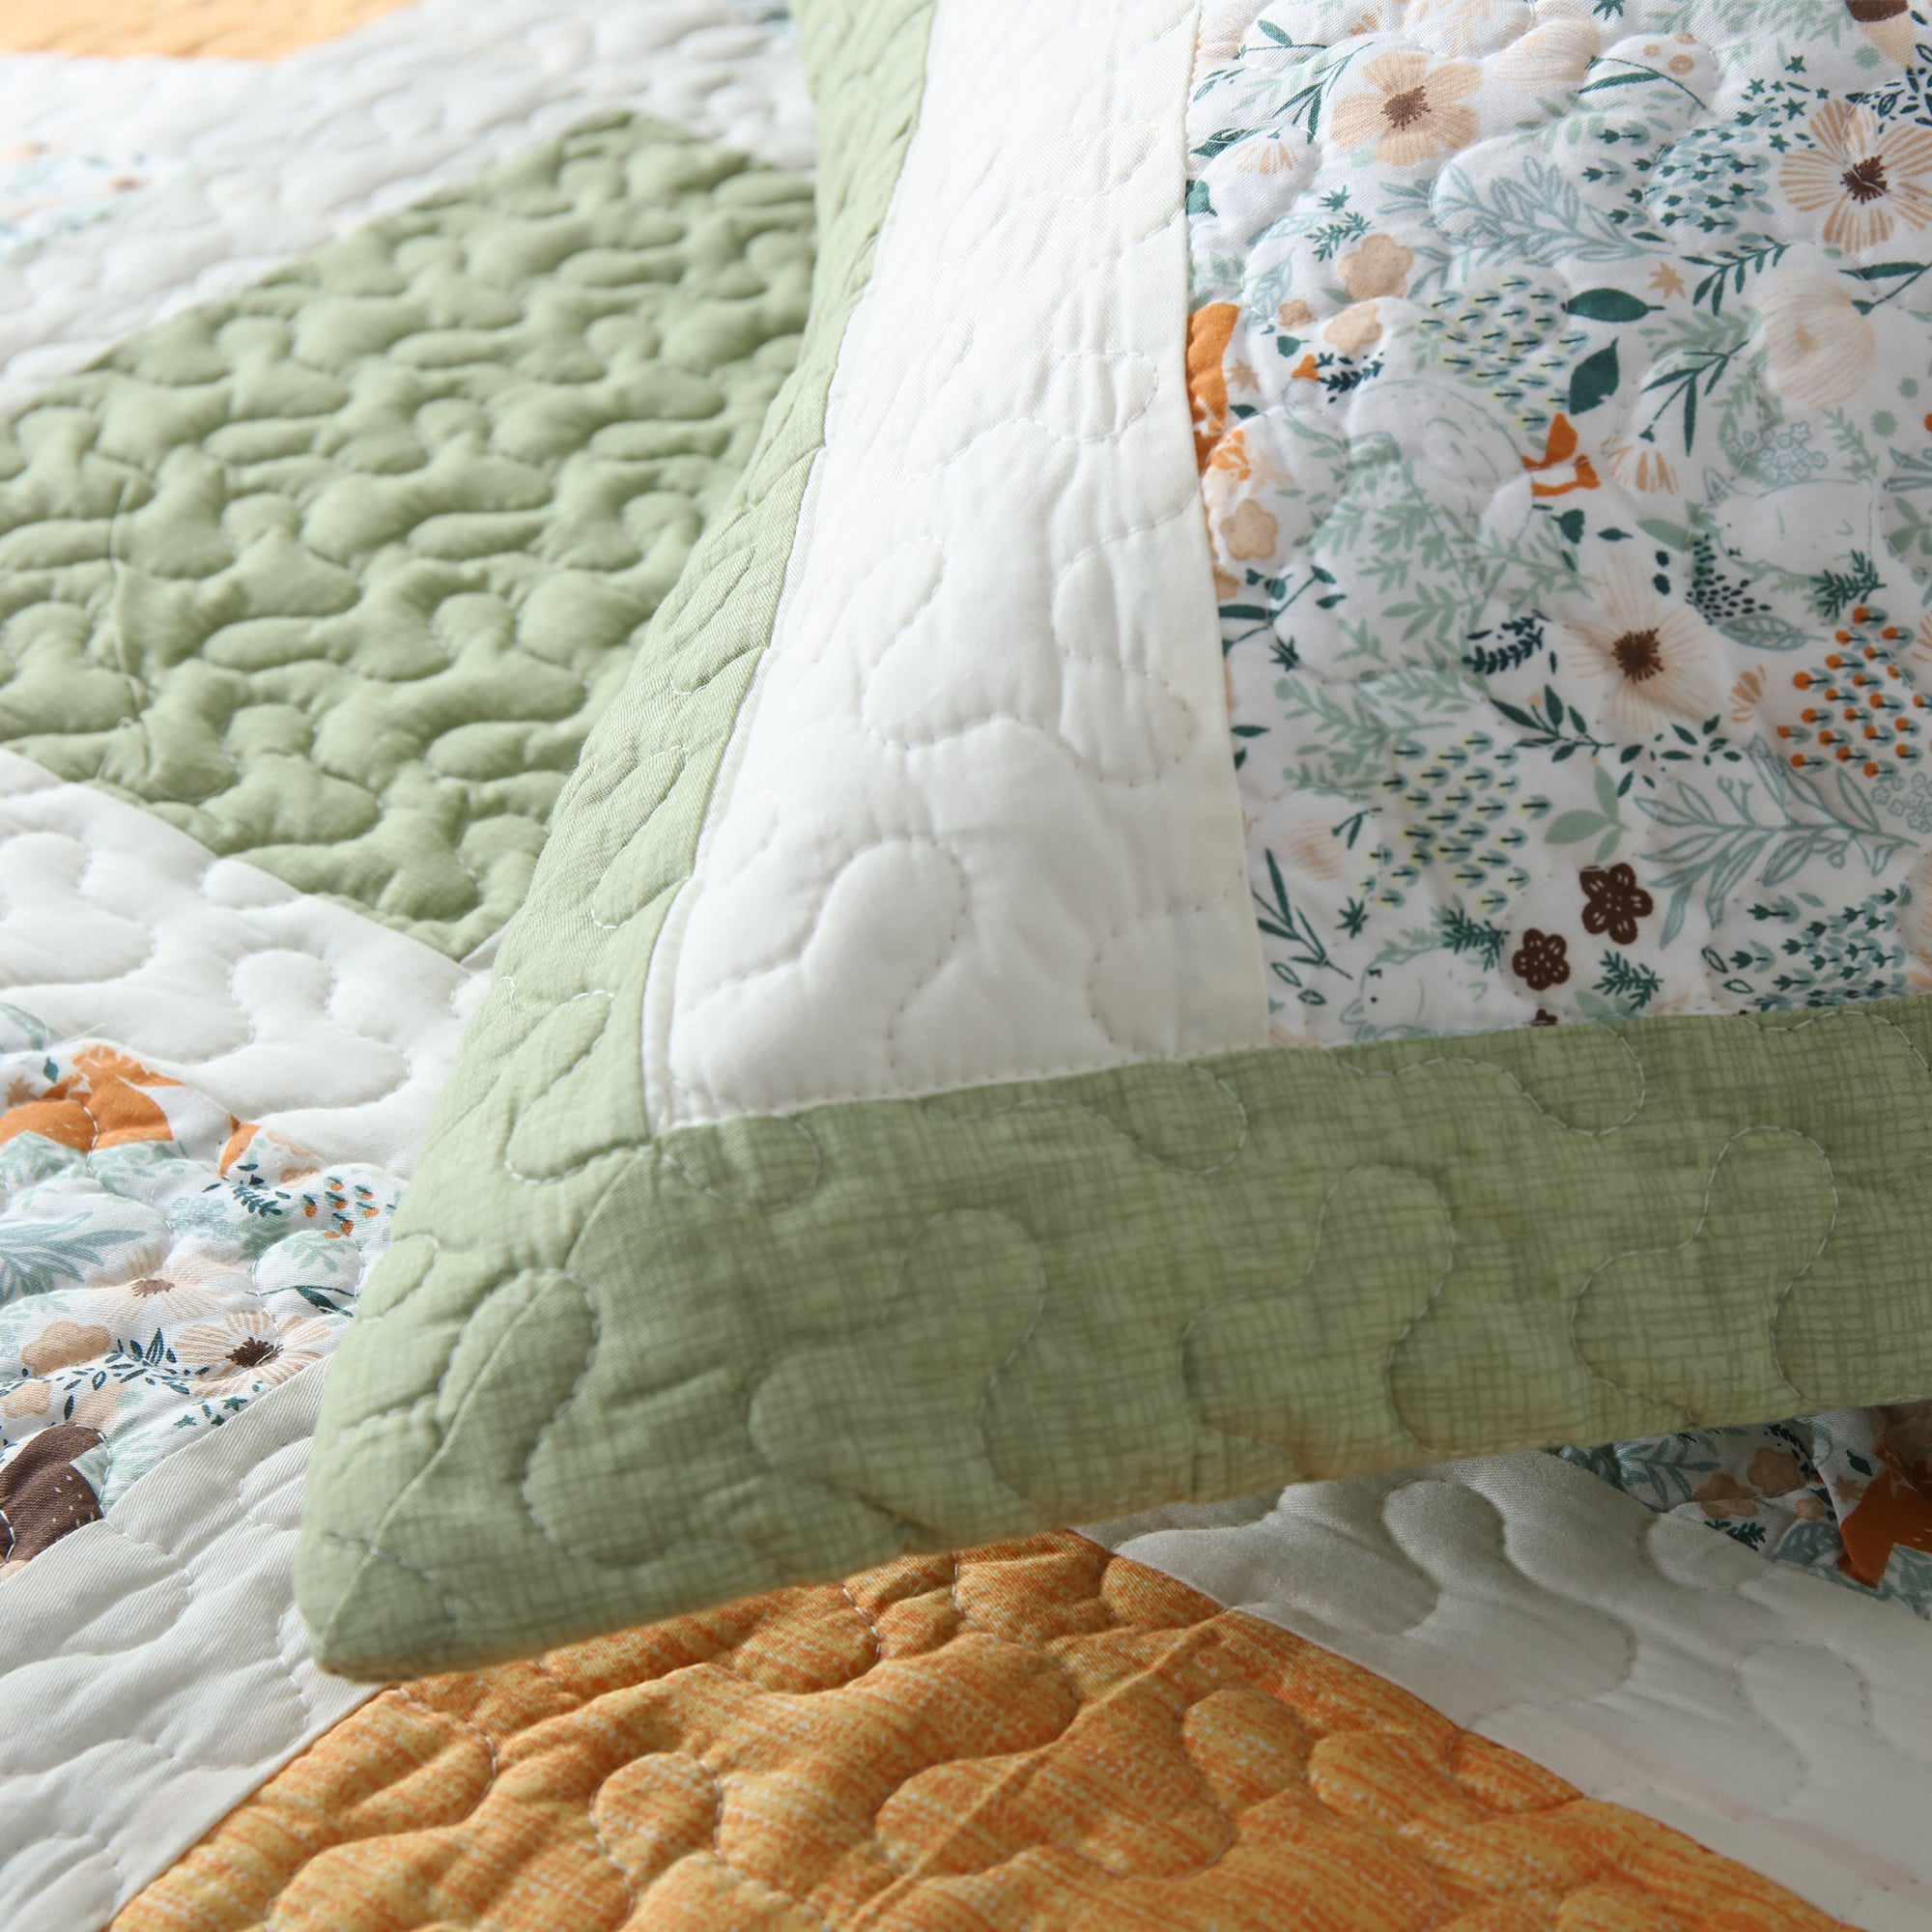 Handcrafted Christmas Patchwork Cotton Quilt Bedspread Set - 3-Piece Vintage Style Holiday Bedding PW103